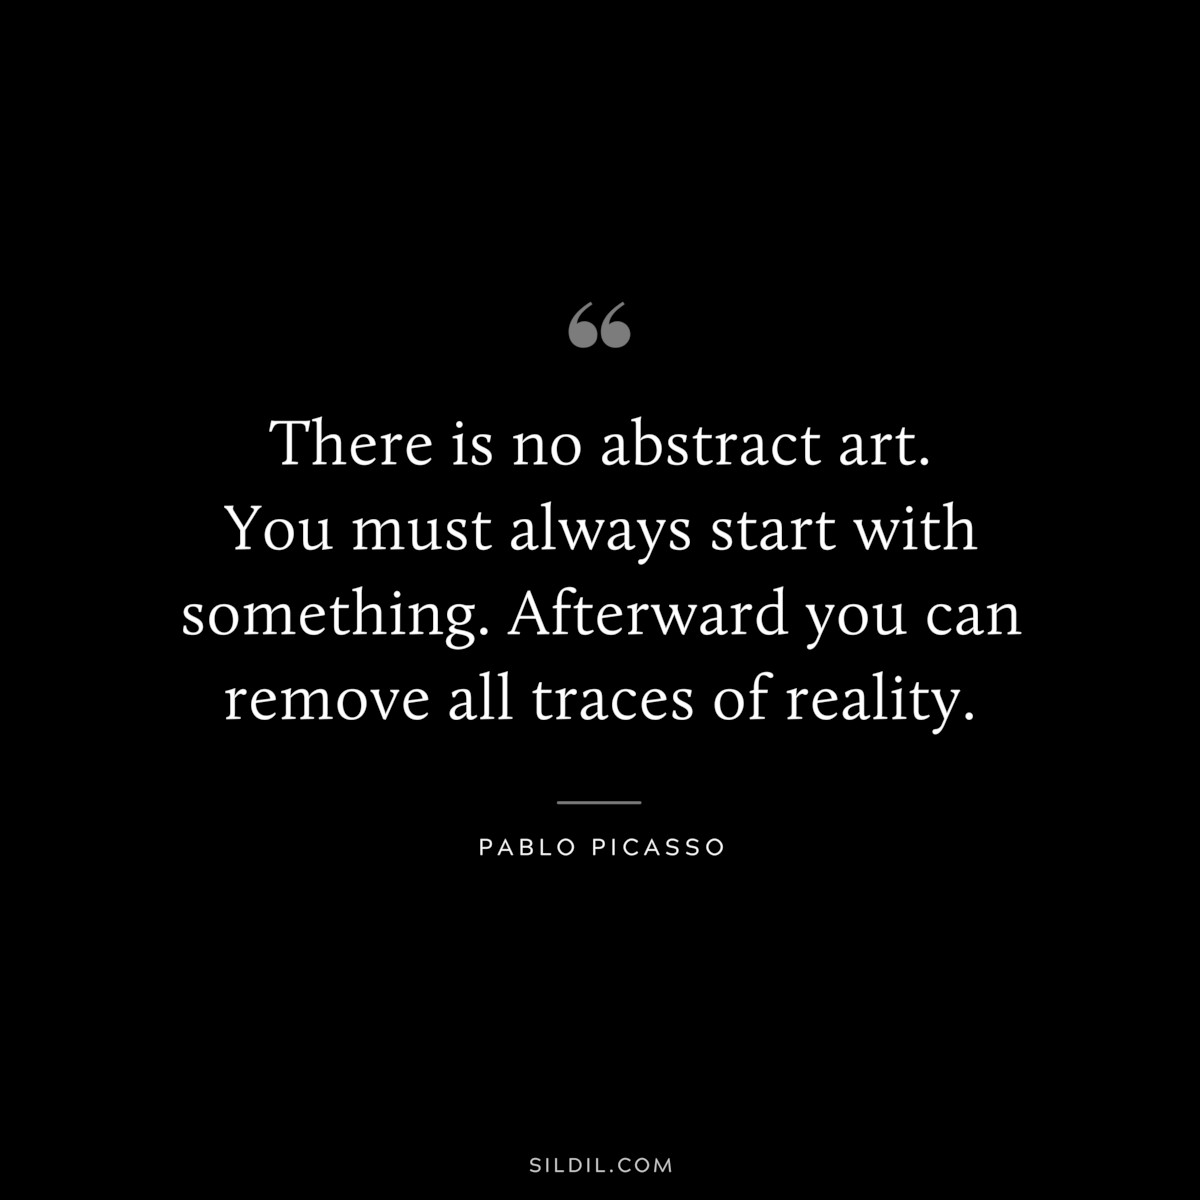 There is no abstract art. You must always start with something. Afterward you can remove all traces of reality. ― Pablo Picasso